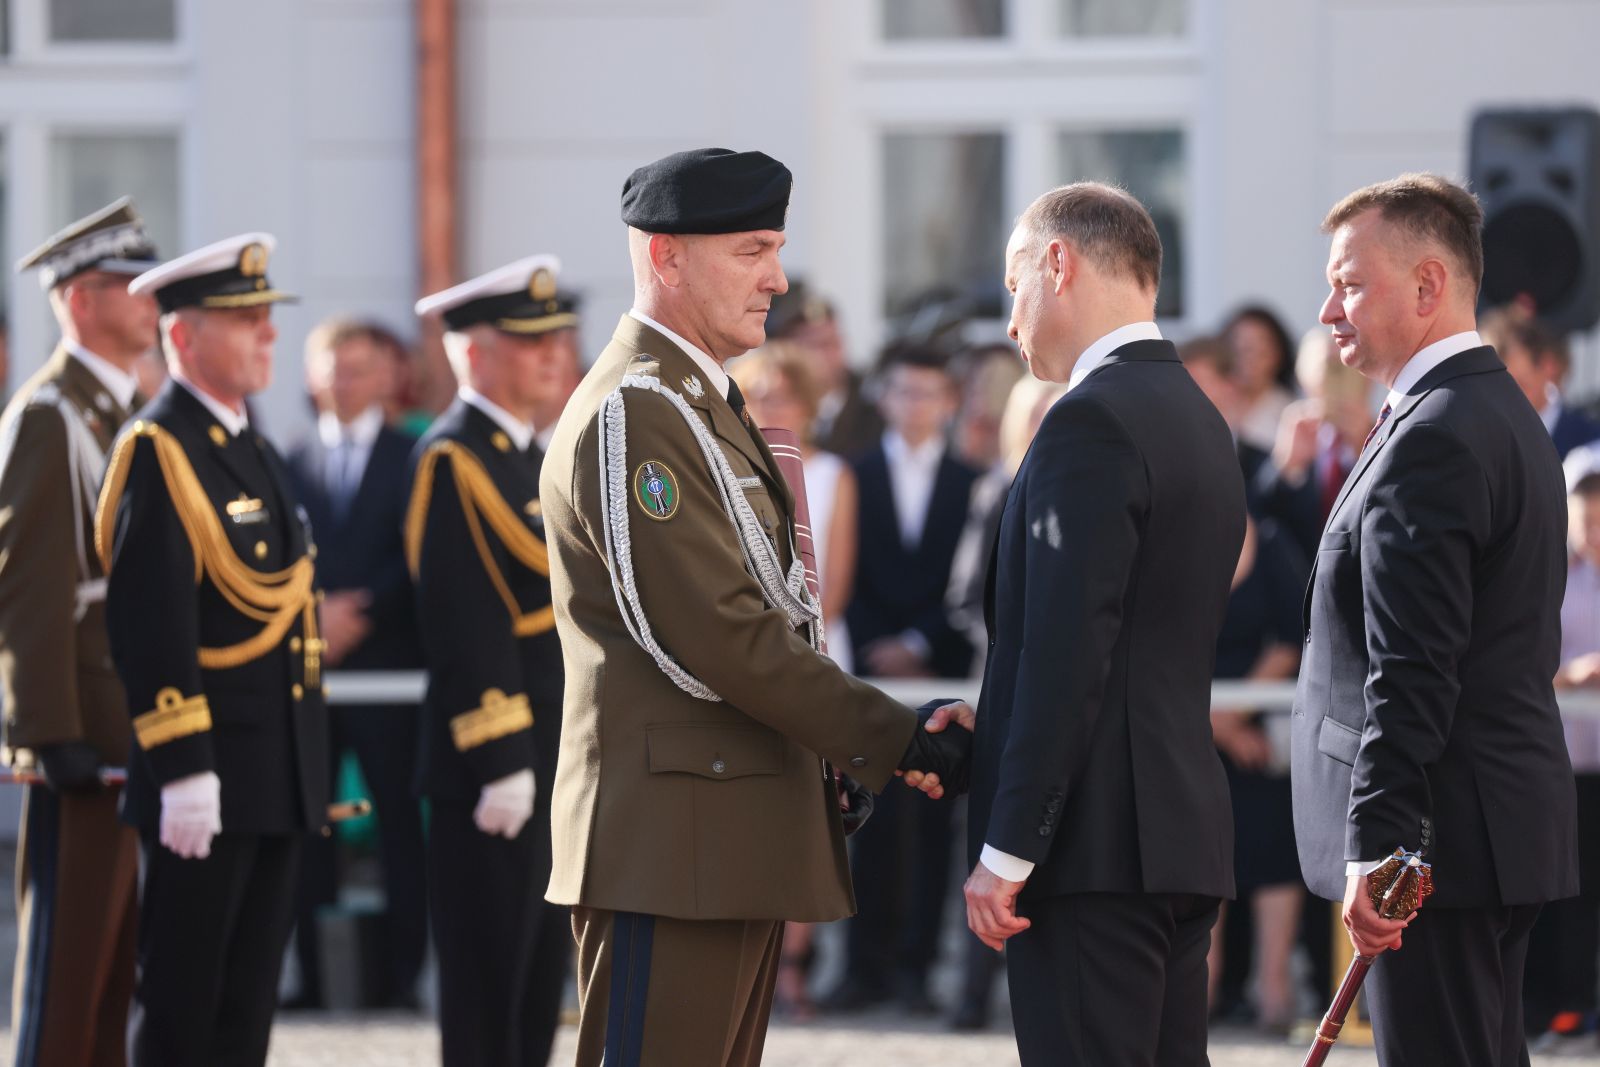 epa10800478 Polish President Andrzej Duda (C-R) and Commander of the 17th 'Wielkopolska' Mechanized Brigade Slawomir Kocanowski (C-L) during the presentation of general and admiral nominations and state decorations in the courtyard of the Presidential Palace in Warsaw, Poland, 14 August 2023. The celebrations of the anniversary of the Battle of Warsaw and the Polish Army Day are underway, which this year are held under the slogan 'Strong White and Red'.  EPA/Leszek Szymanski POLAND OUT